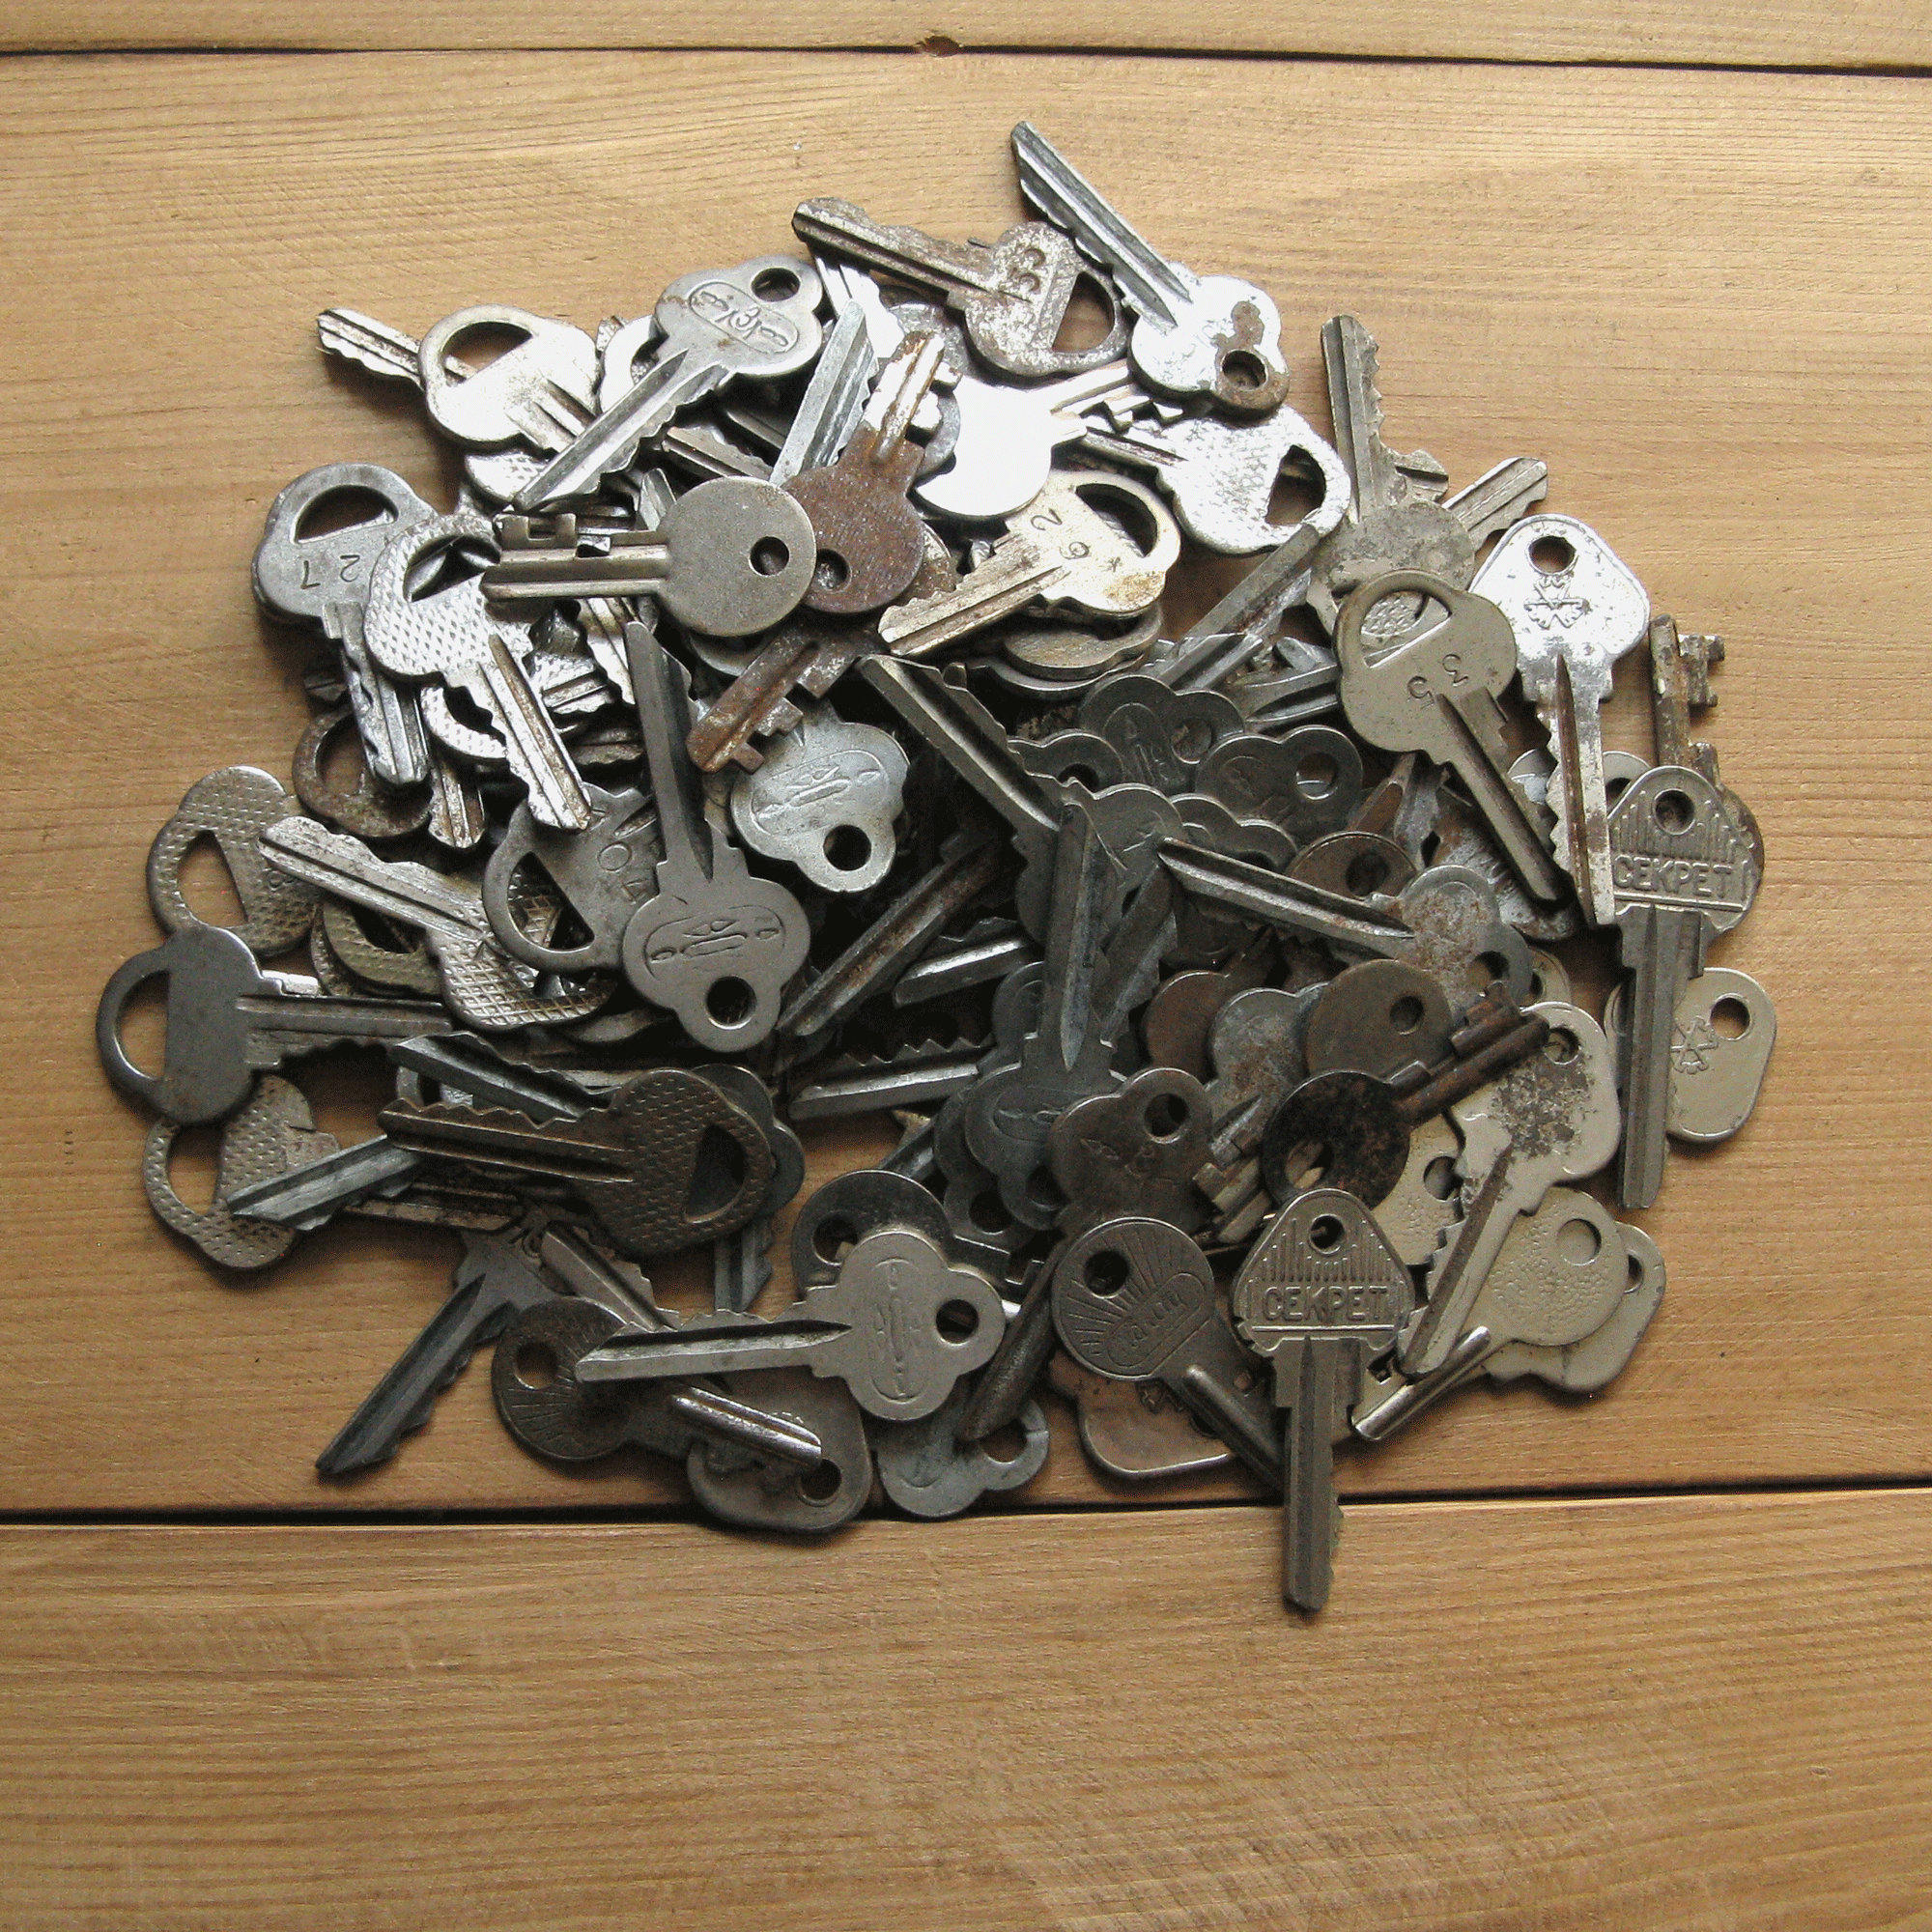 Tiny Metal Snaps for Doll Clothes, Small Bracelets, Key Fobs, Keychains,  and Luggage Tags 8mm Spring Snap Buttons 10ct 1 